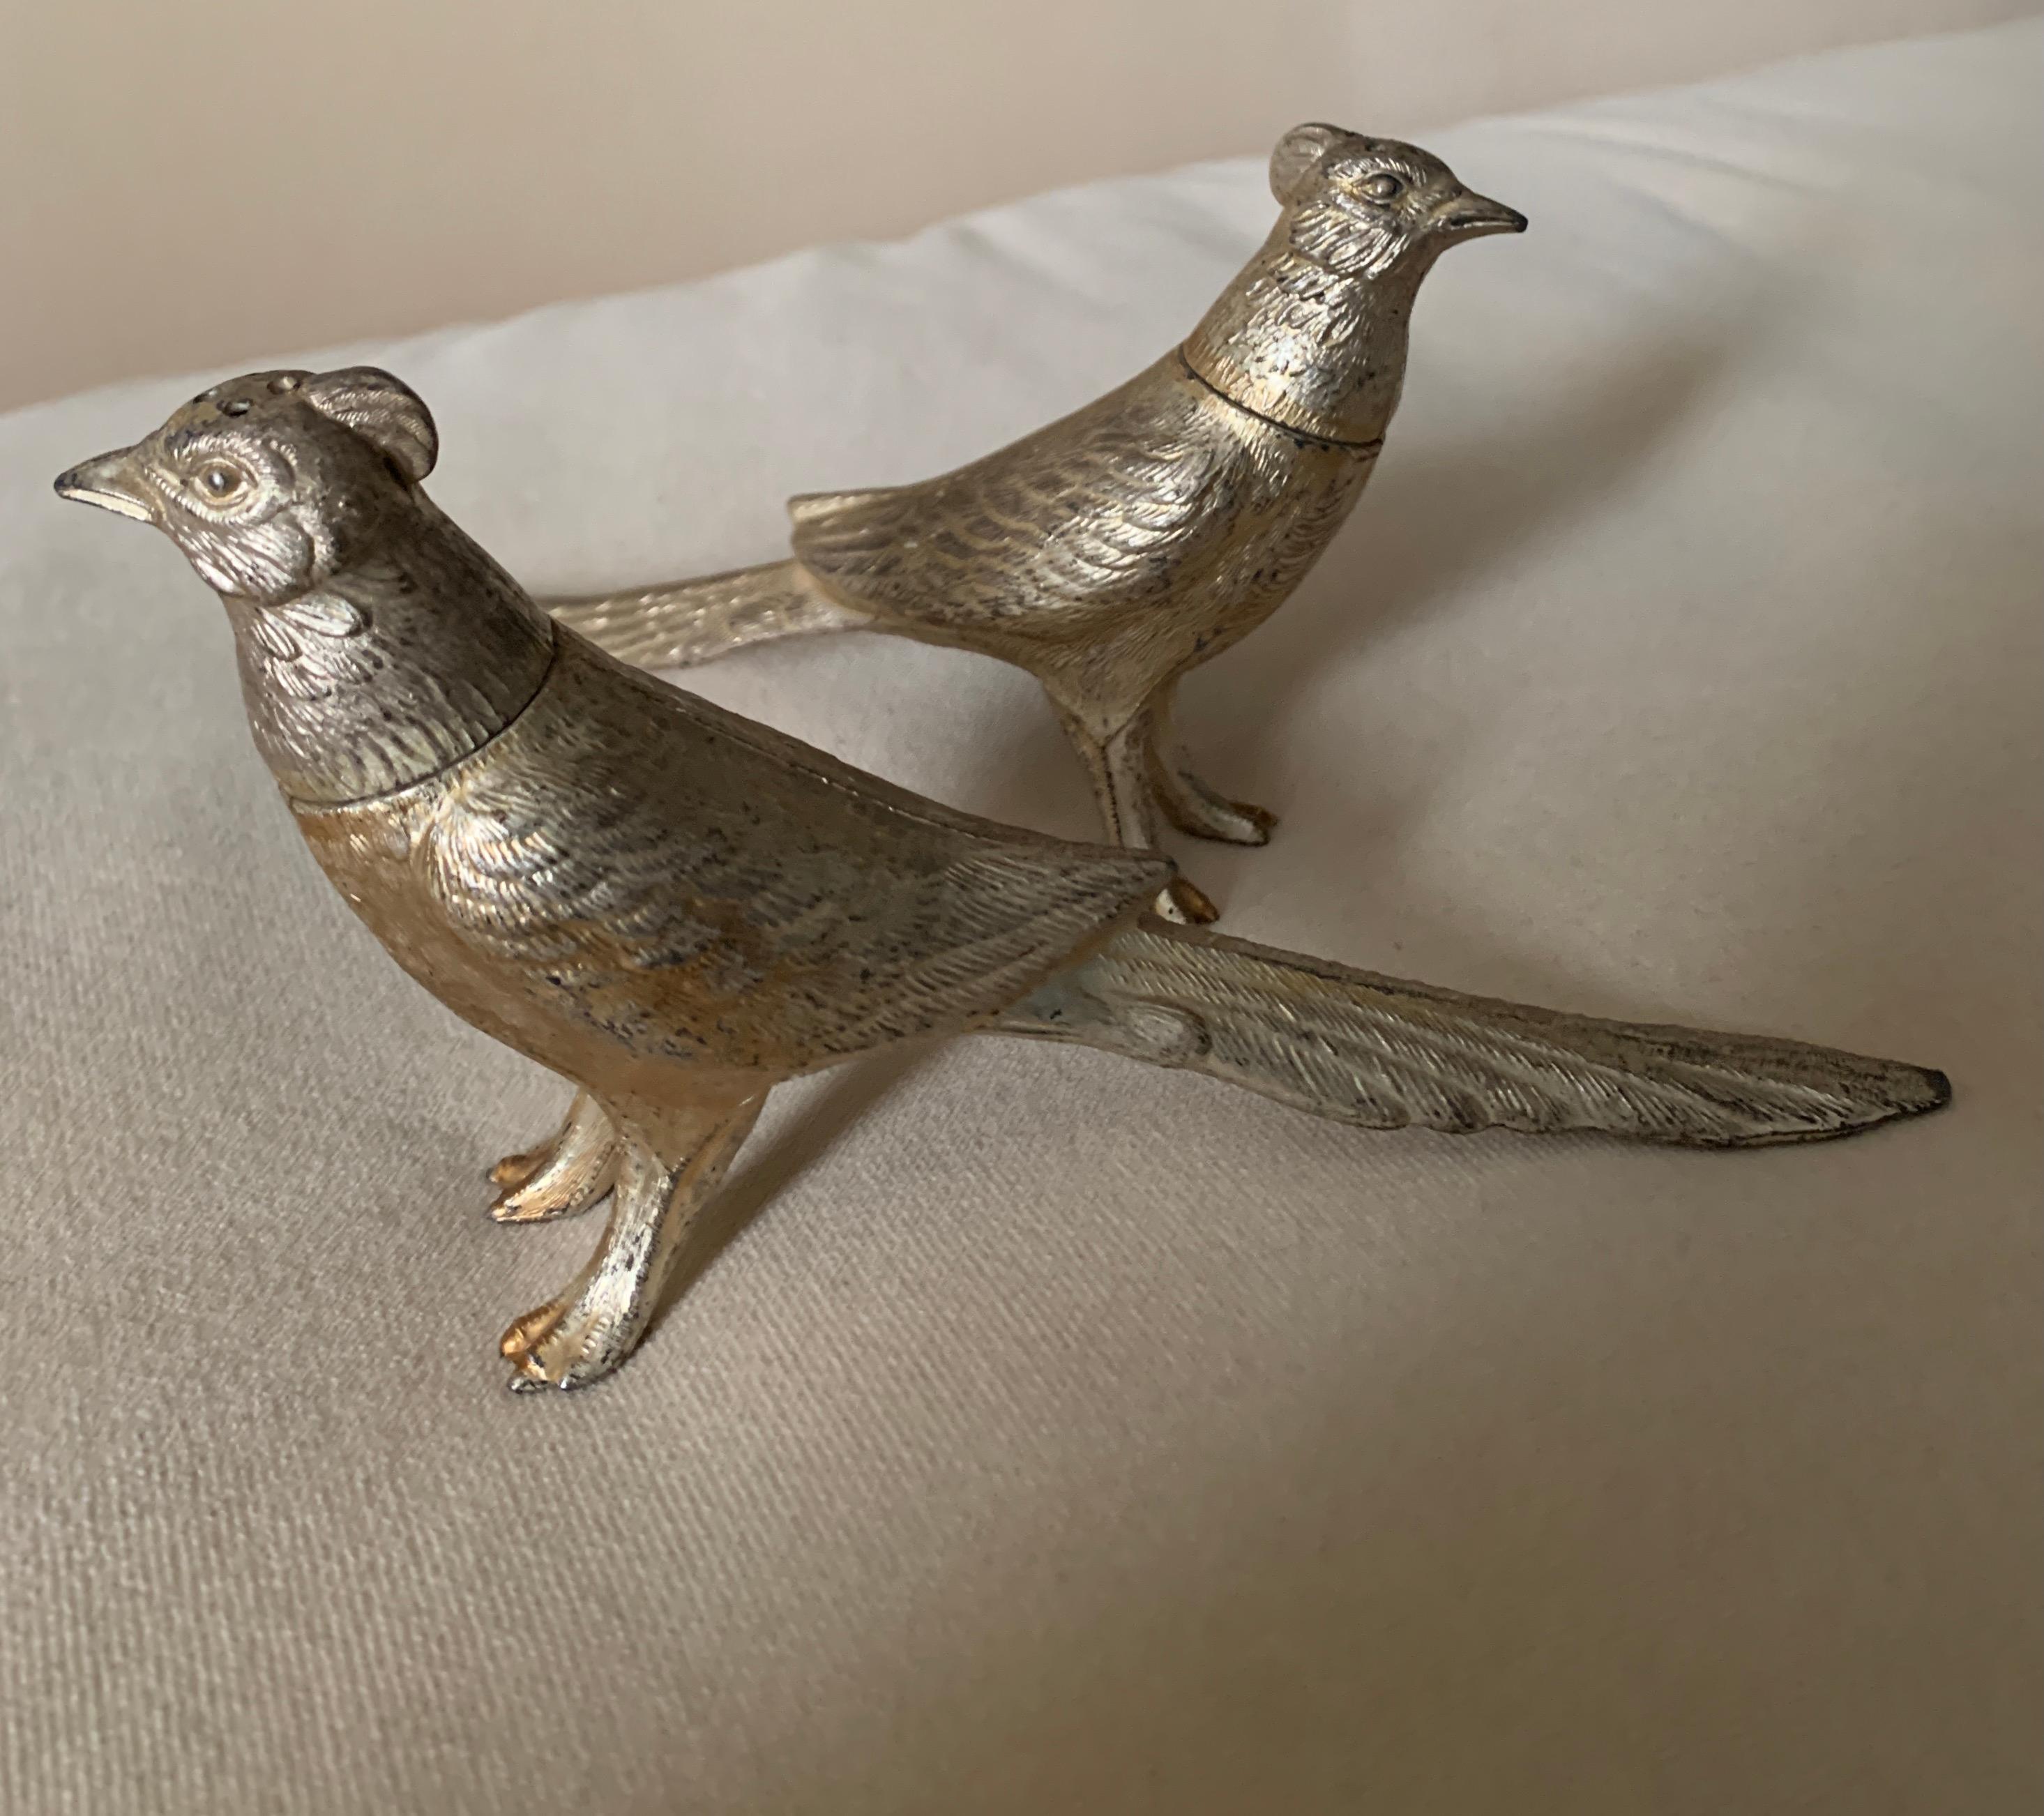 A pair of Pheasant salt and pepper shakers. The pair are a wonderful addition to any table and especially those on Thanksgiving or the holidays. The pair have a nice patination and look to be white gold leafed. Easily opened by unscrewing the heads.